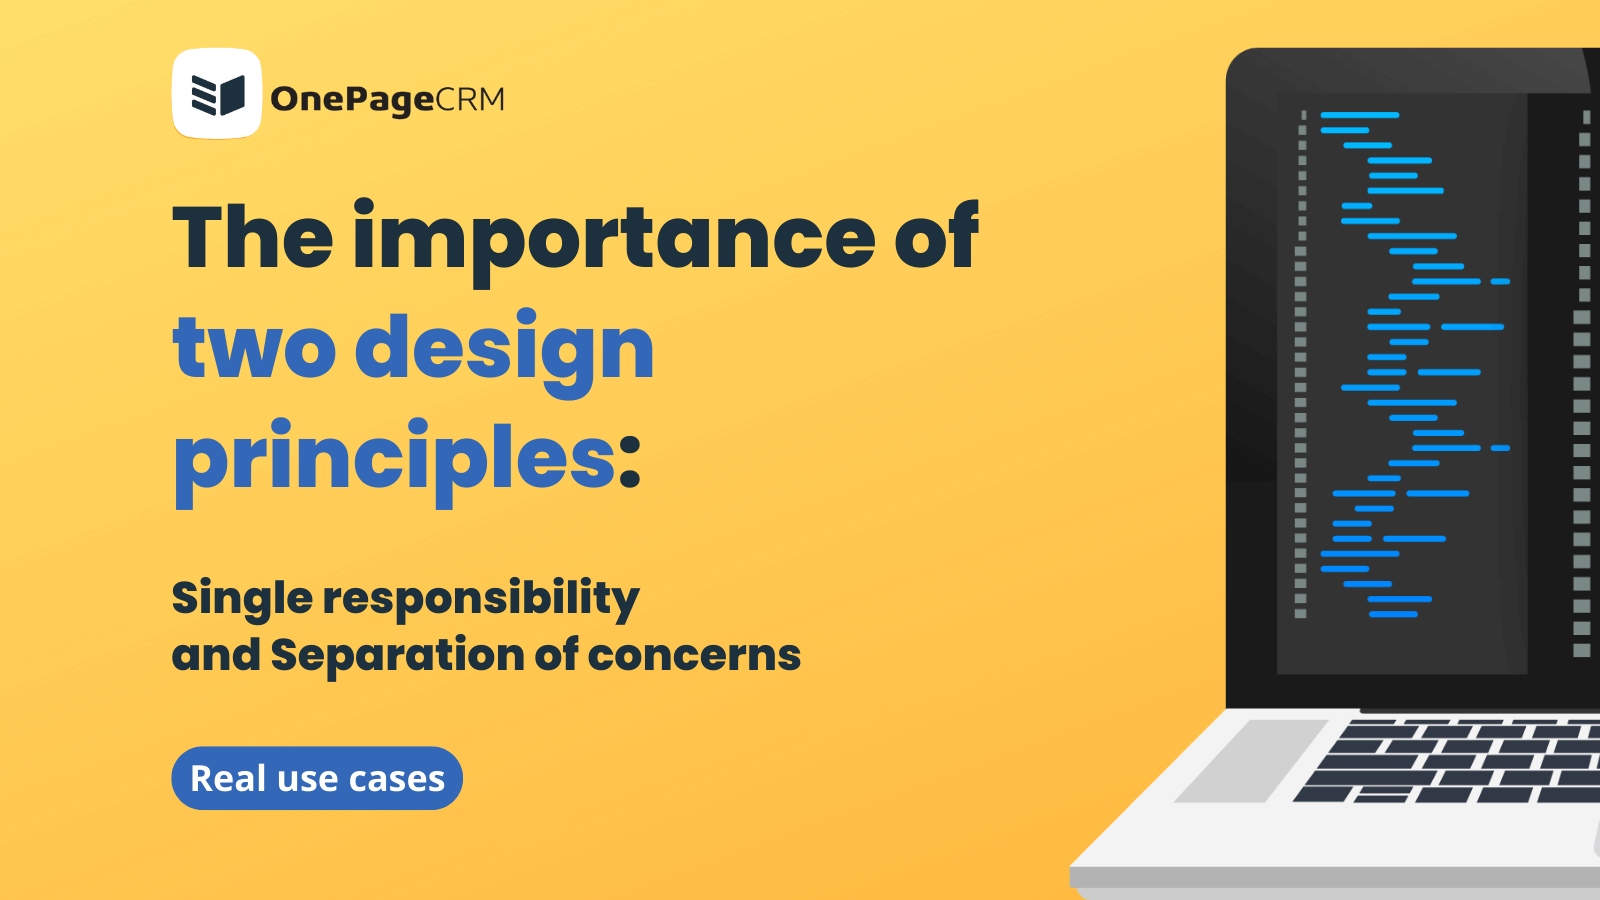 Single responsibility and Separation of concerns principles [Real use cases]